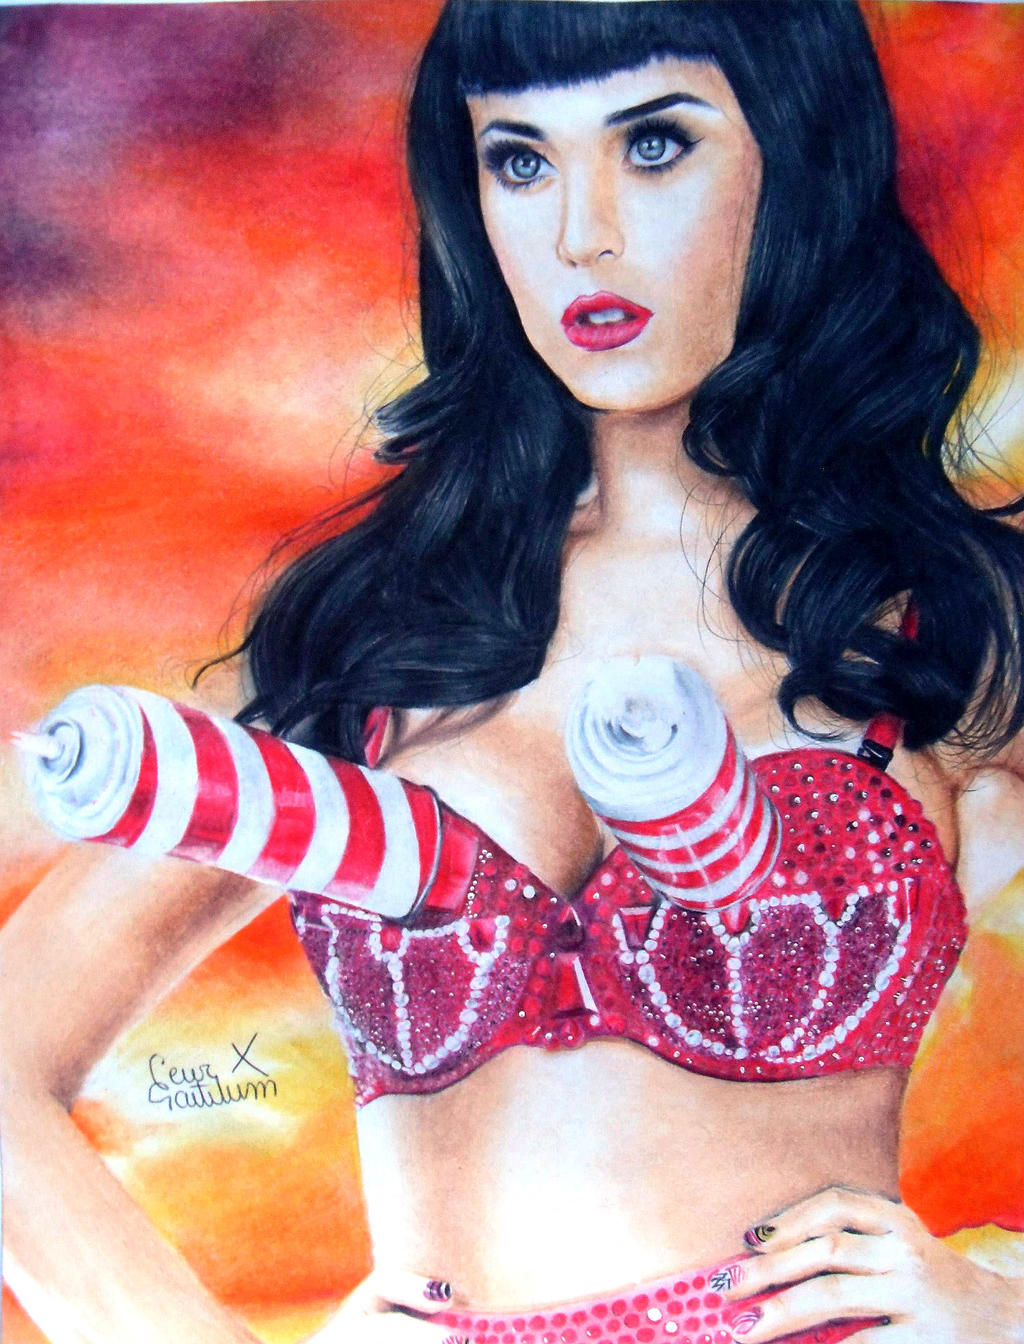 Katy Perry - California Girls Whipped Cream by CesarGastelum on